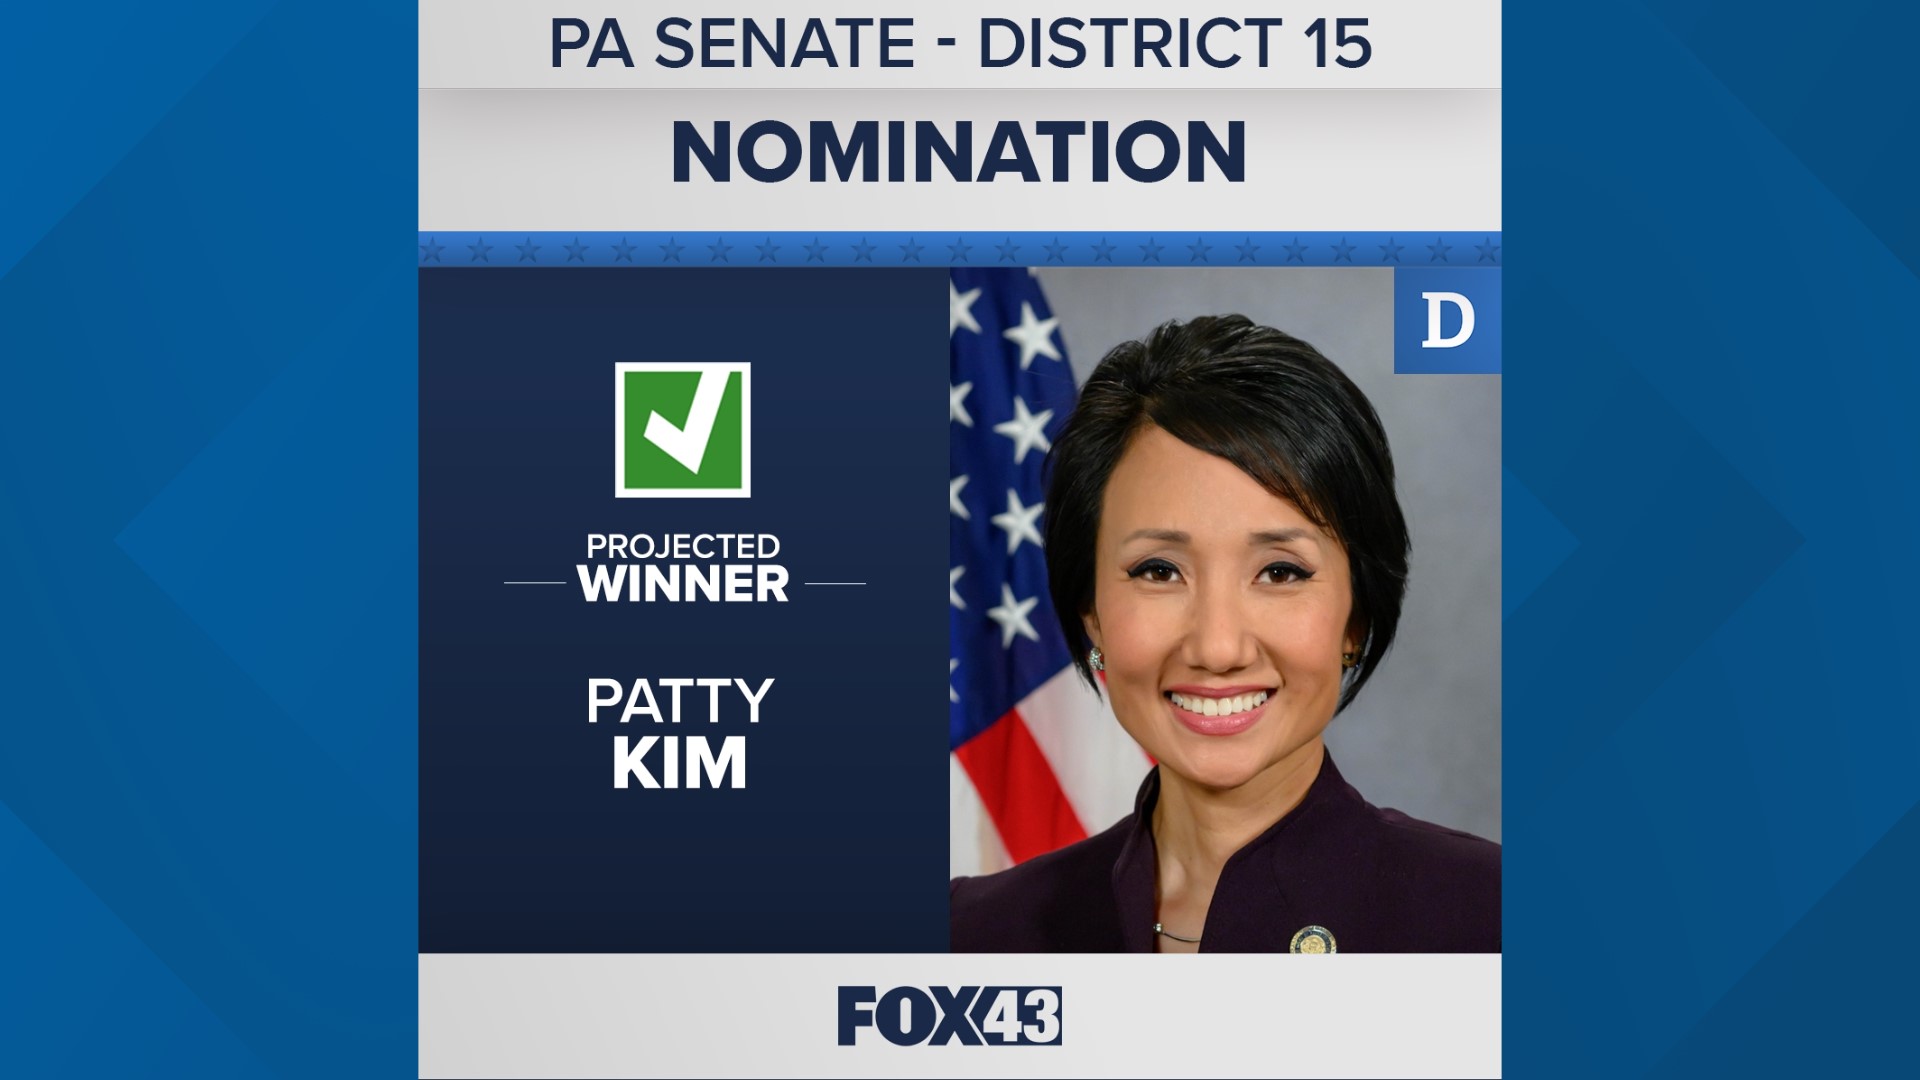 Patty Kim has been a member of the Pennsylvania House of Representatives since being elected in 2012, but now she will run for Senate.